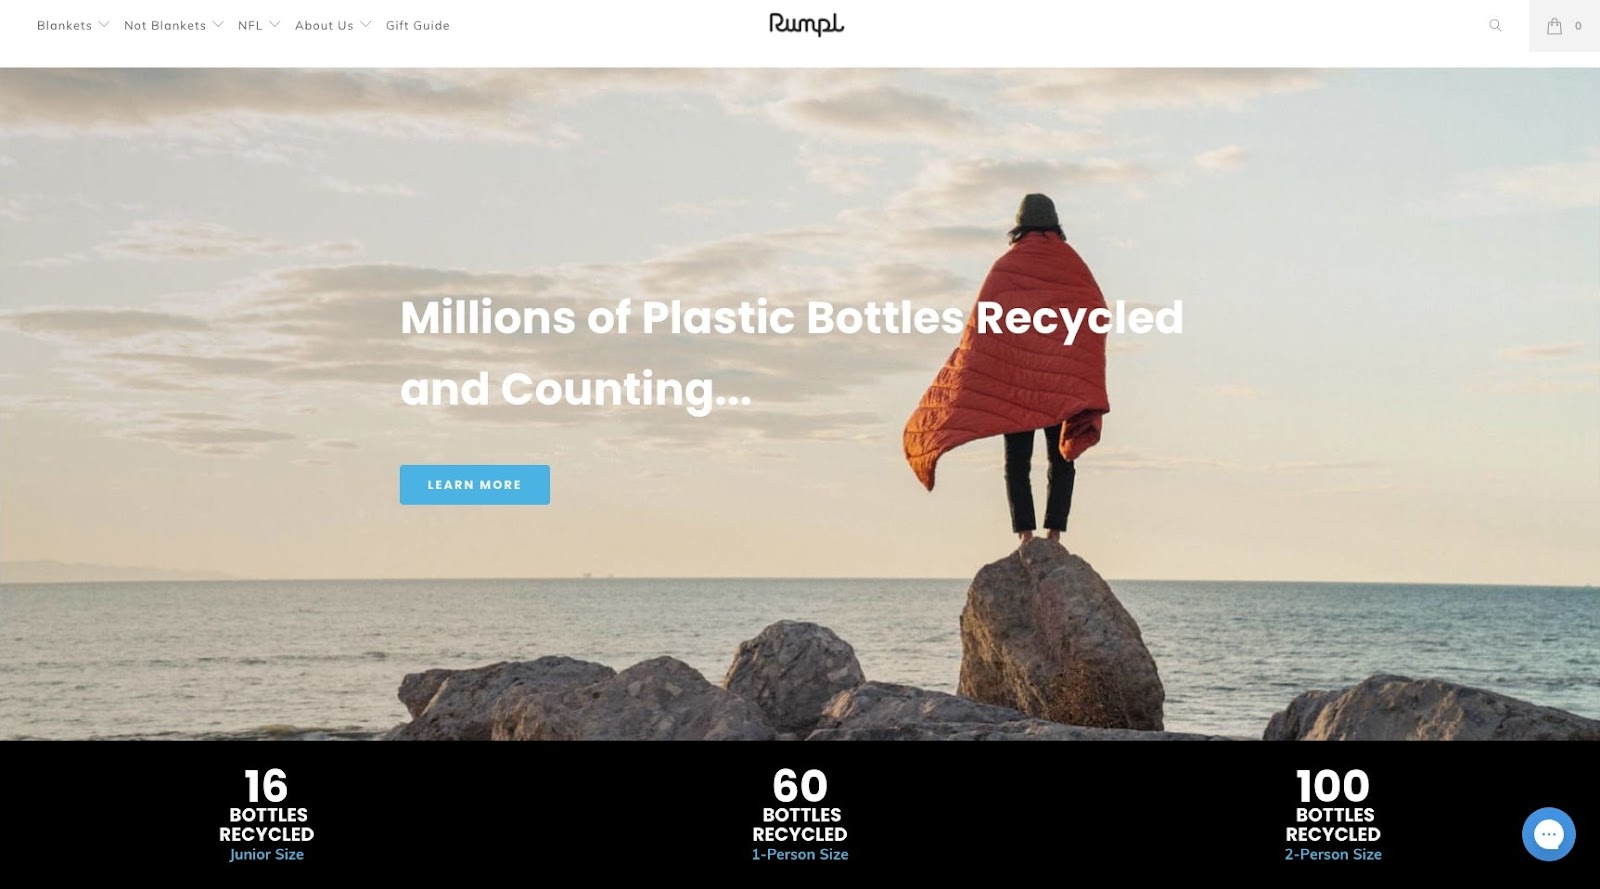 rumpl blankets use recycled bottles help clean up planet